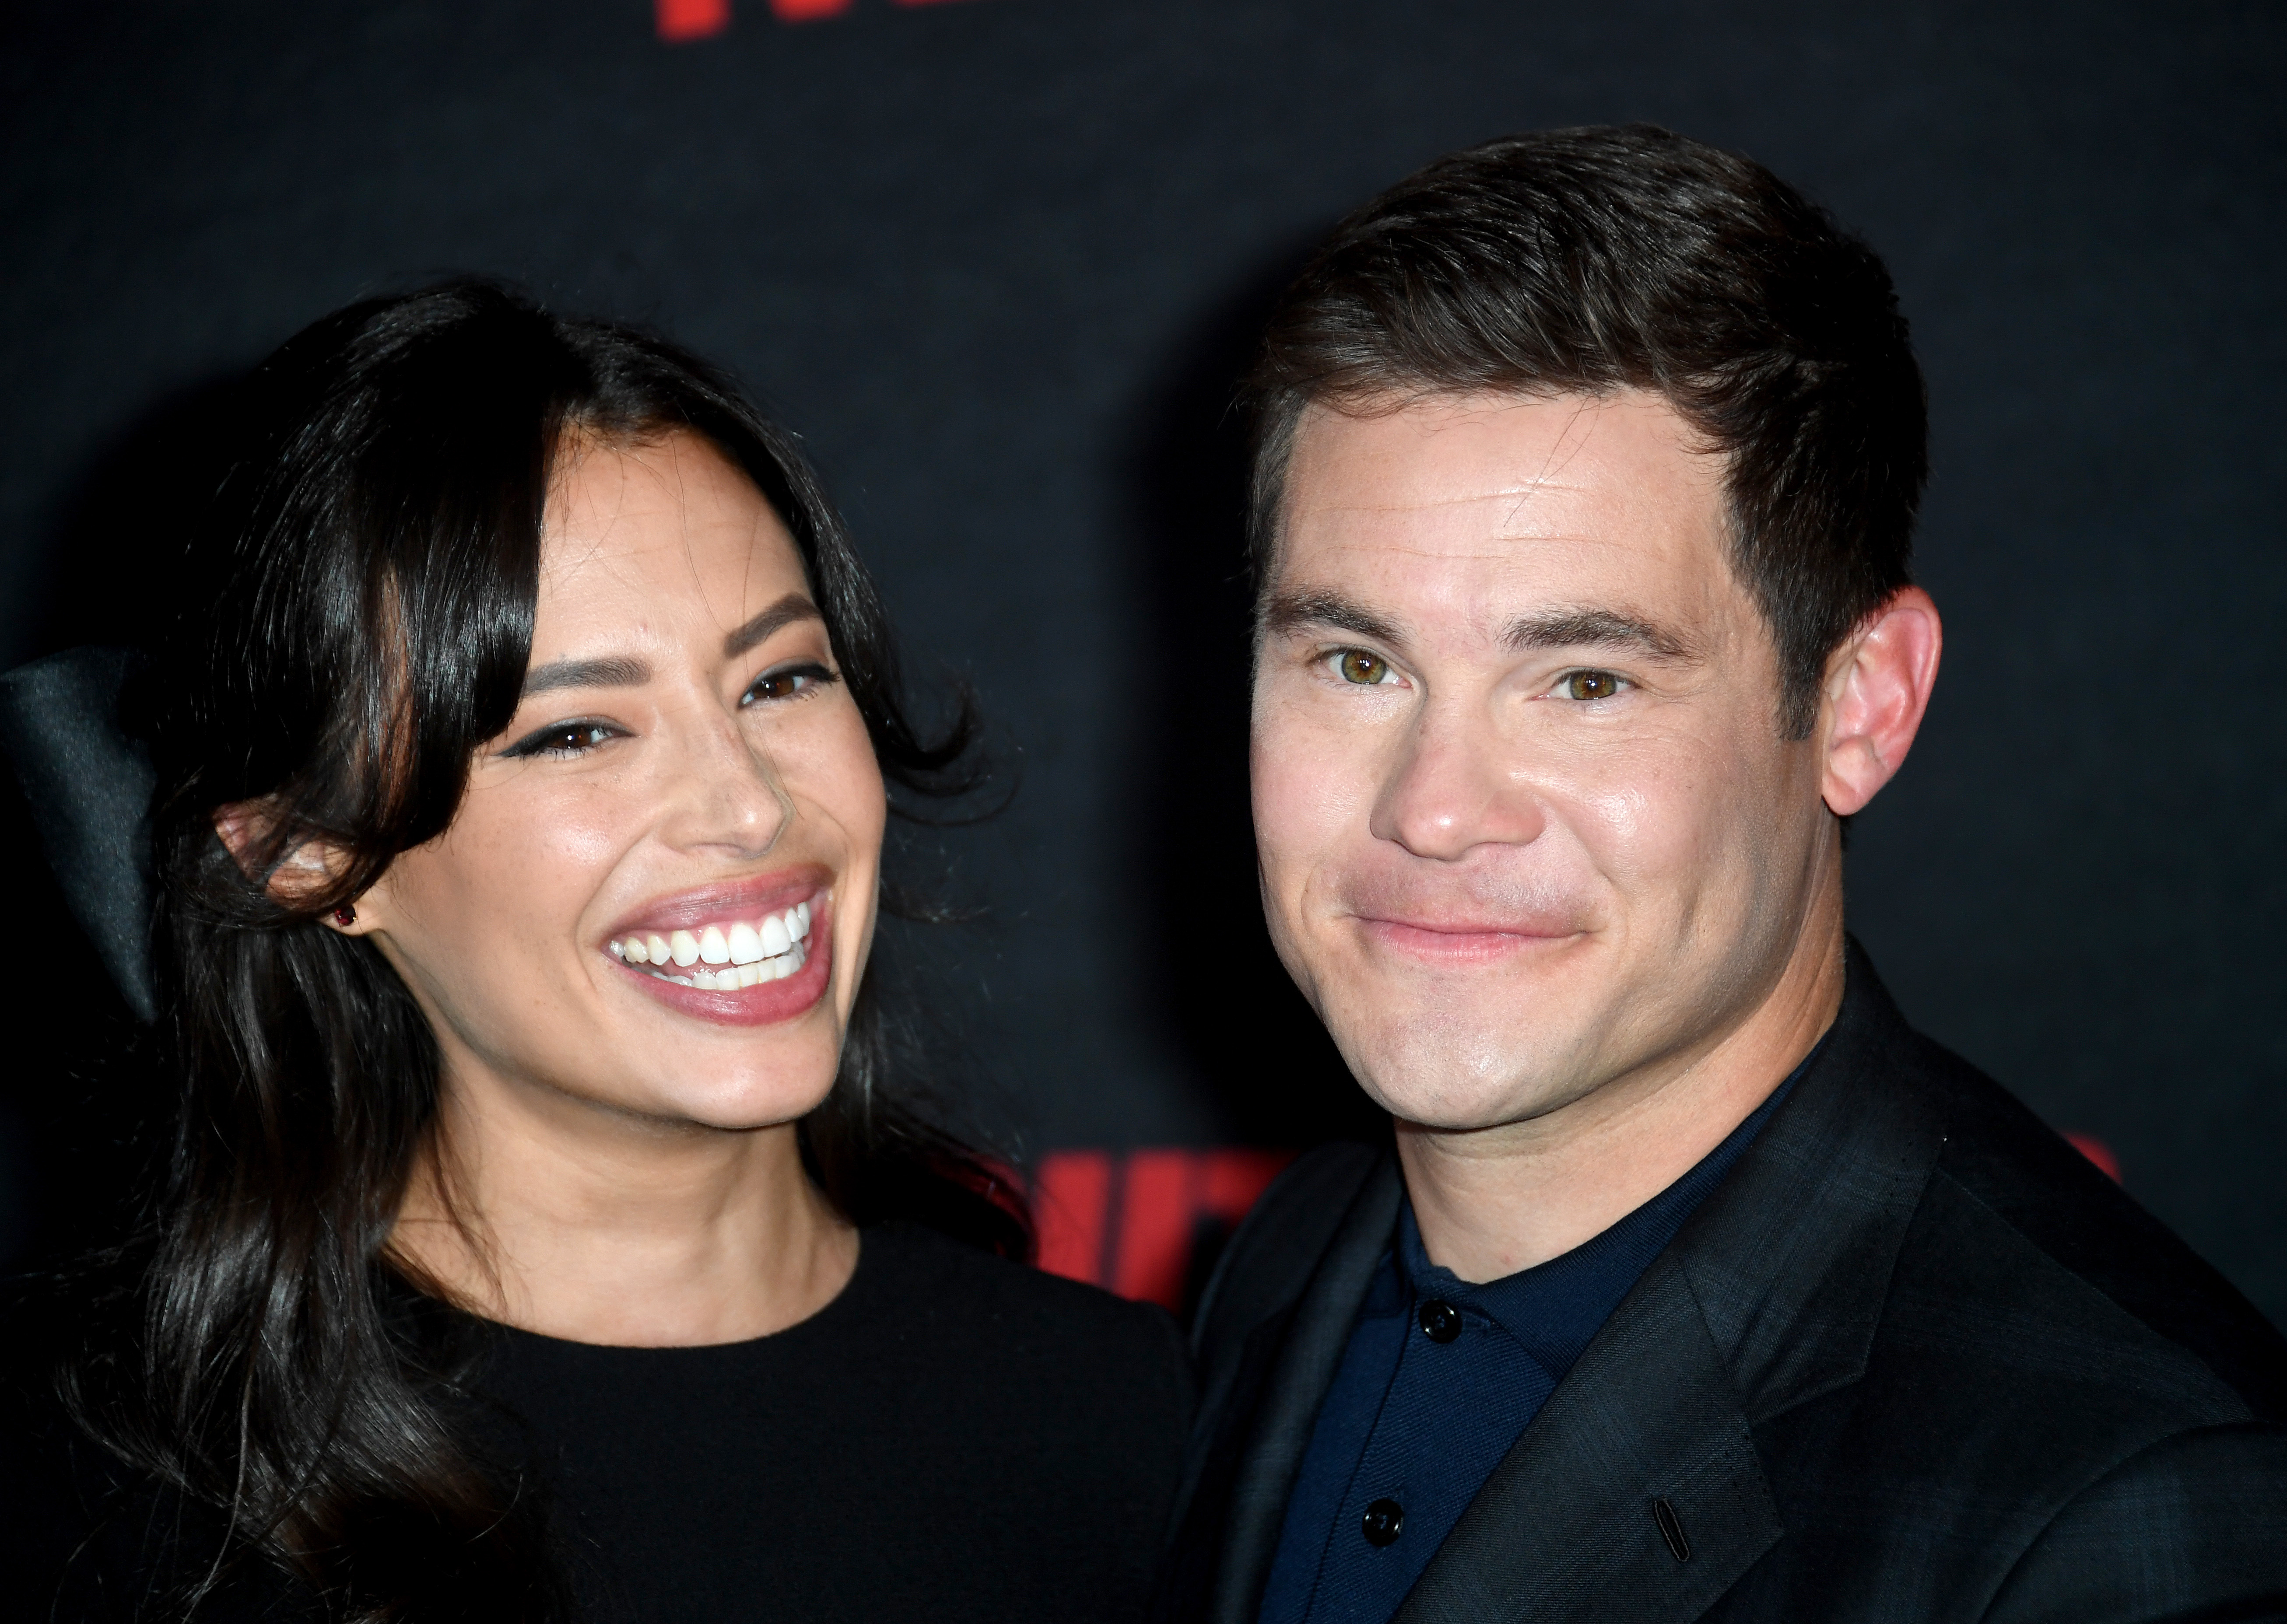 Chloe Bridges and Adam Devine at the premiere of "The Out-Laws" on June 26, 2023, in Los Angeles, California. | Source: Getty Images